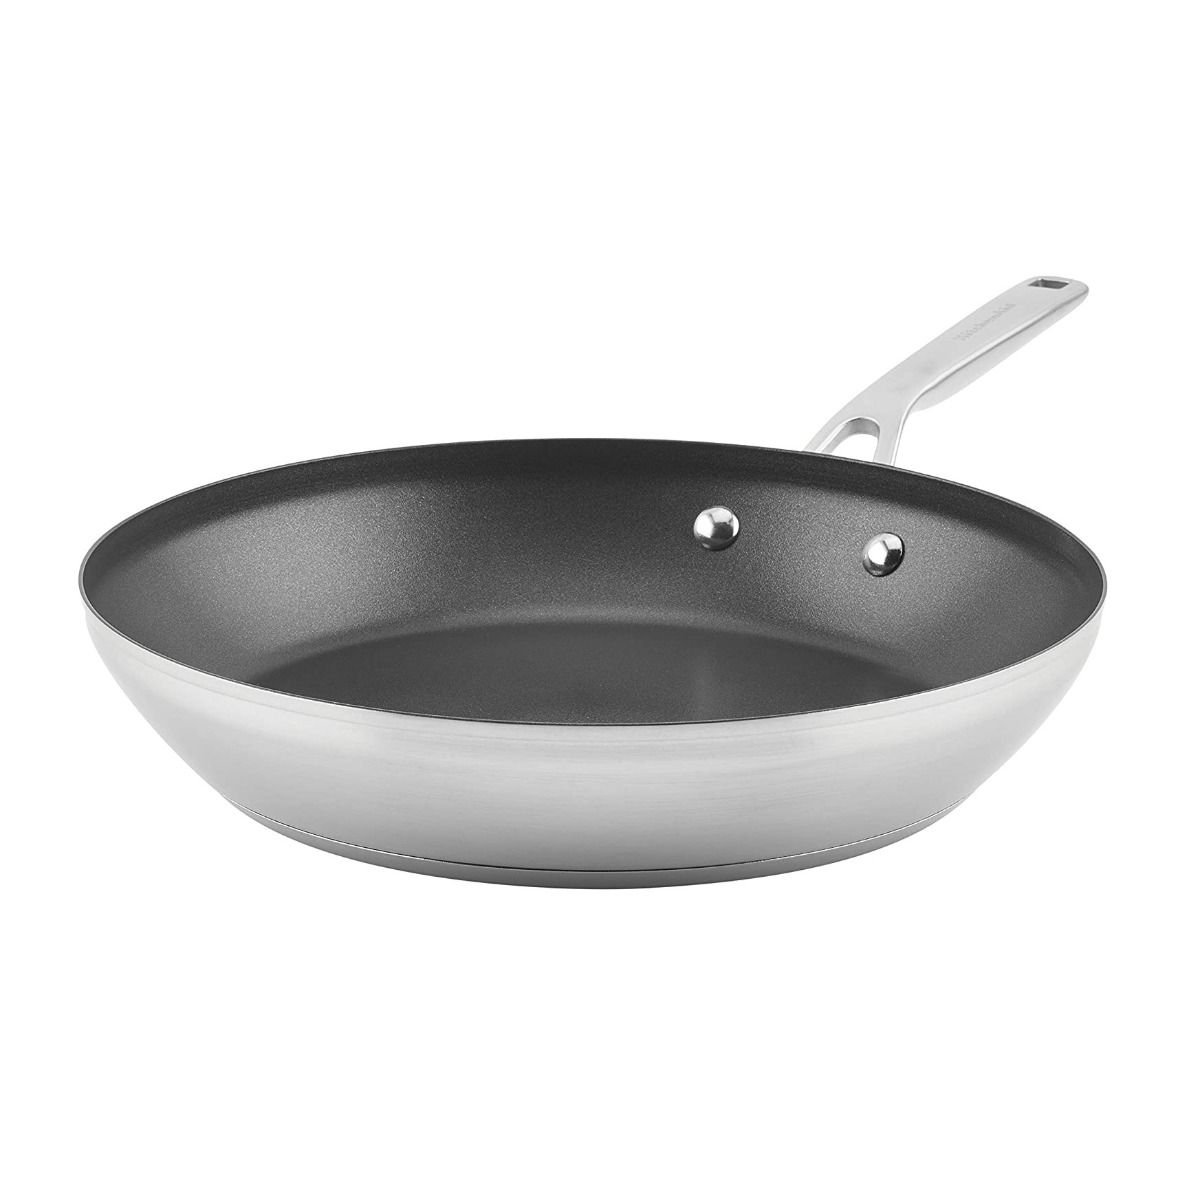 KitchenAid 12.25-Inch Hard-Anodized Nonstick Frying Pan with Lid, Cookware